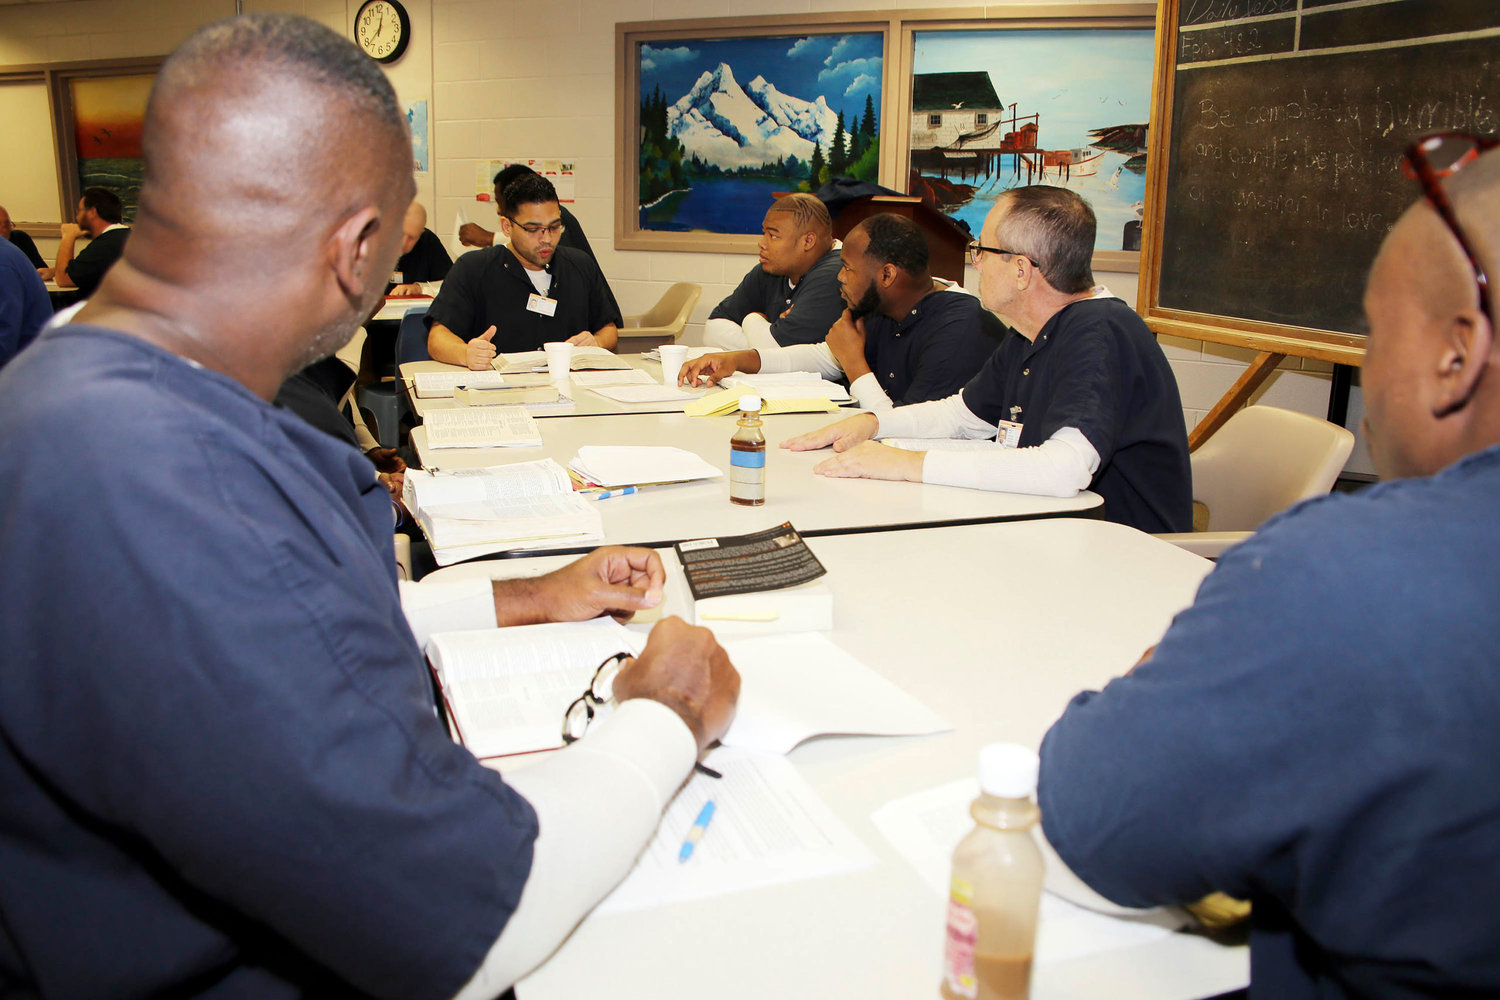 Inmates participate in Orange County Corrections Division’s Faith-Based Program. Note: Photo taken before COVID-19 pandemic where CDC distancing guidelines were not in place.